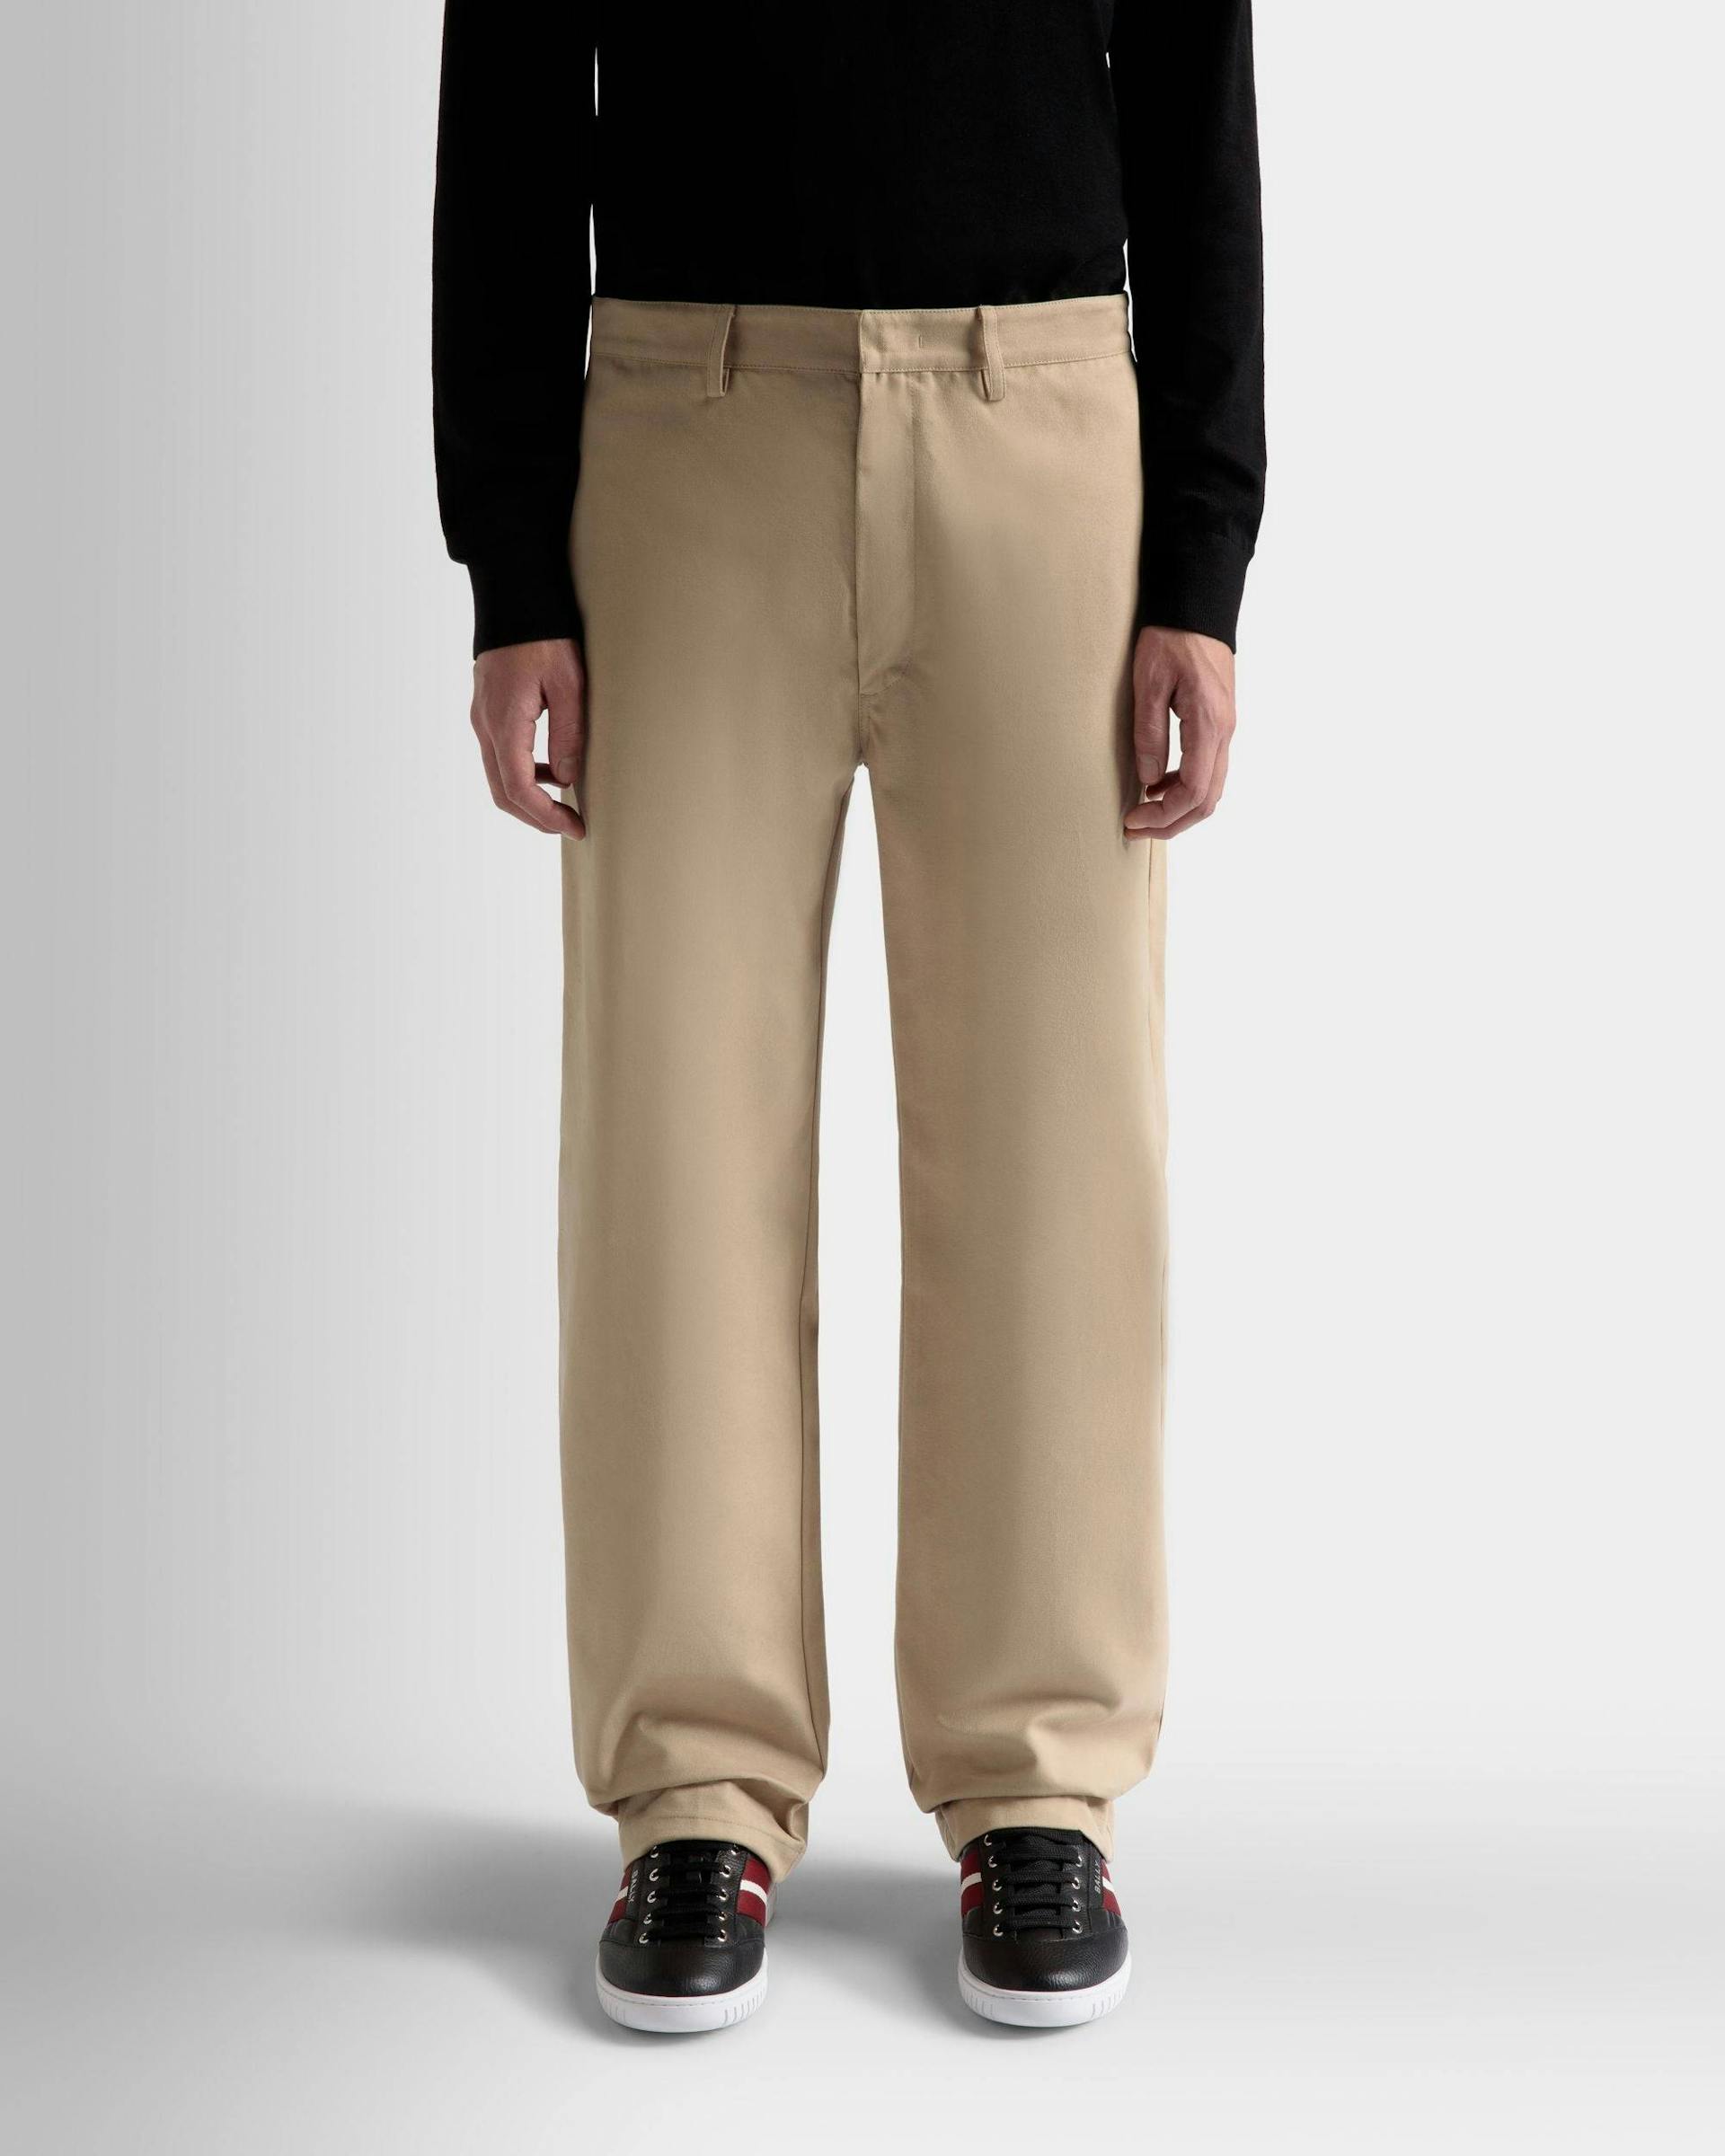 Men's Pants in Camel Cotton | Bally | On Model Close Up